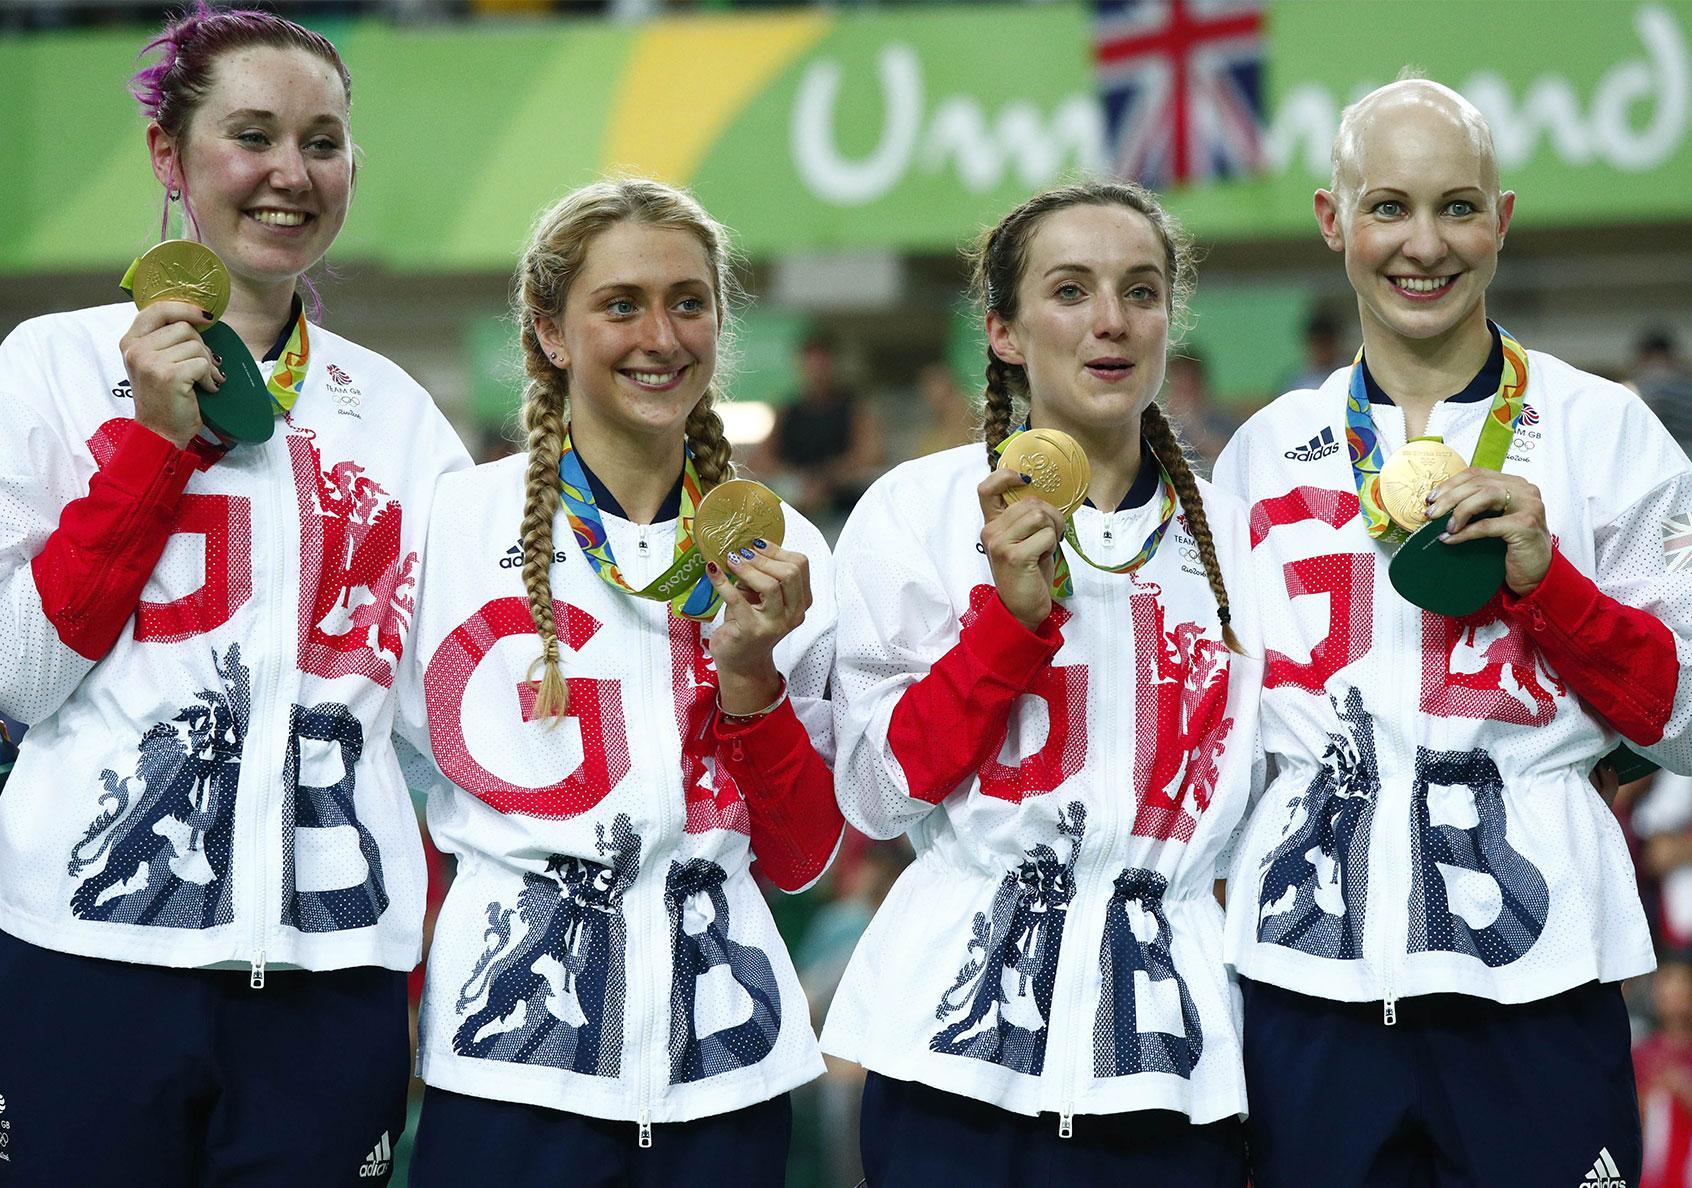 Archibald, Trott, Barker and Rowsell-Shand celebrate winning gold